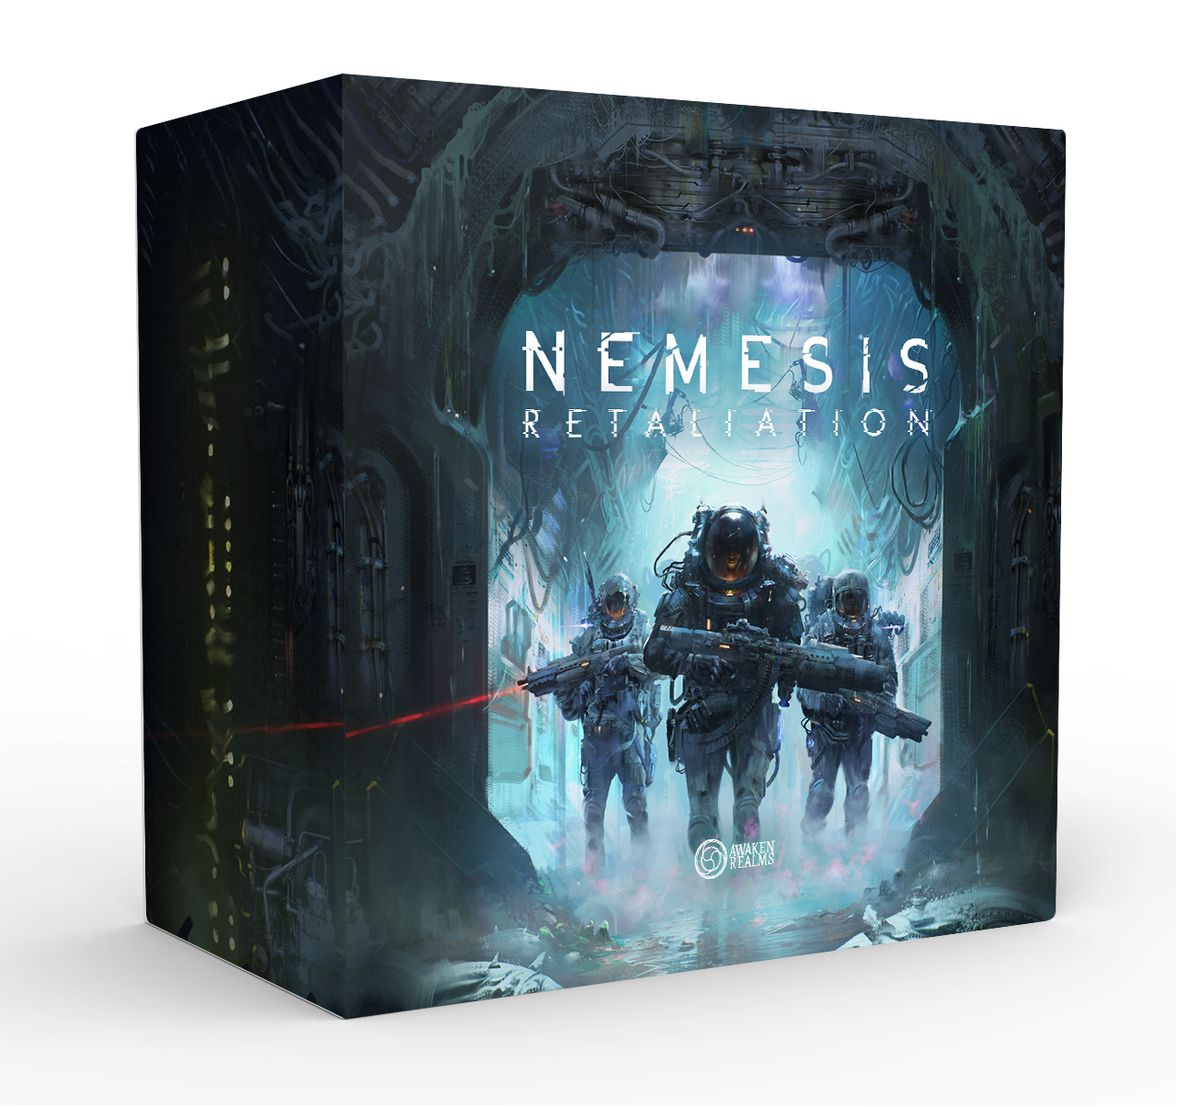 A mockup for the Nemesis: Retaliation box art shows heavily-armored space marines in pressure suits.